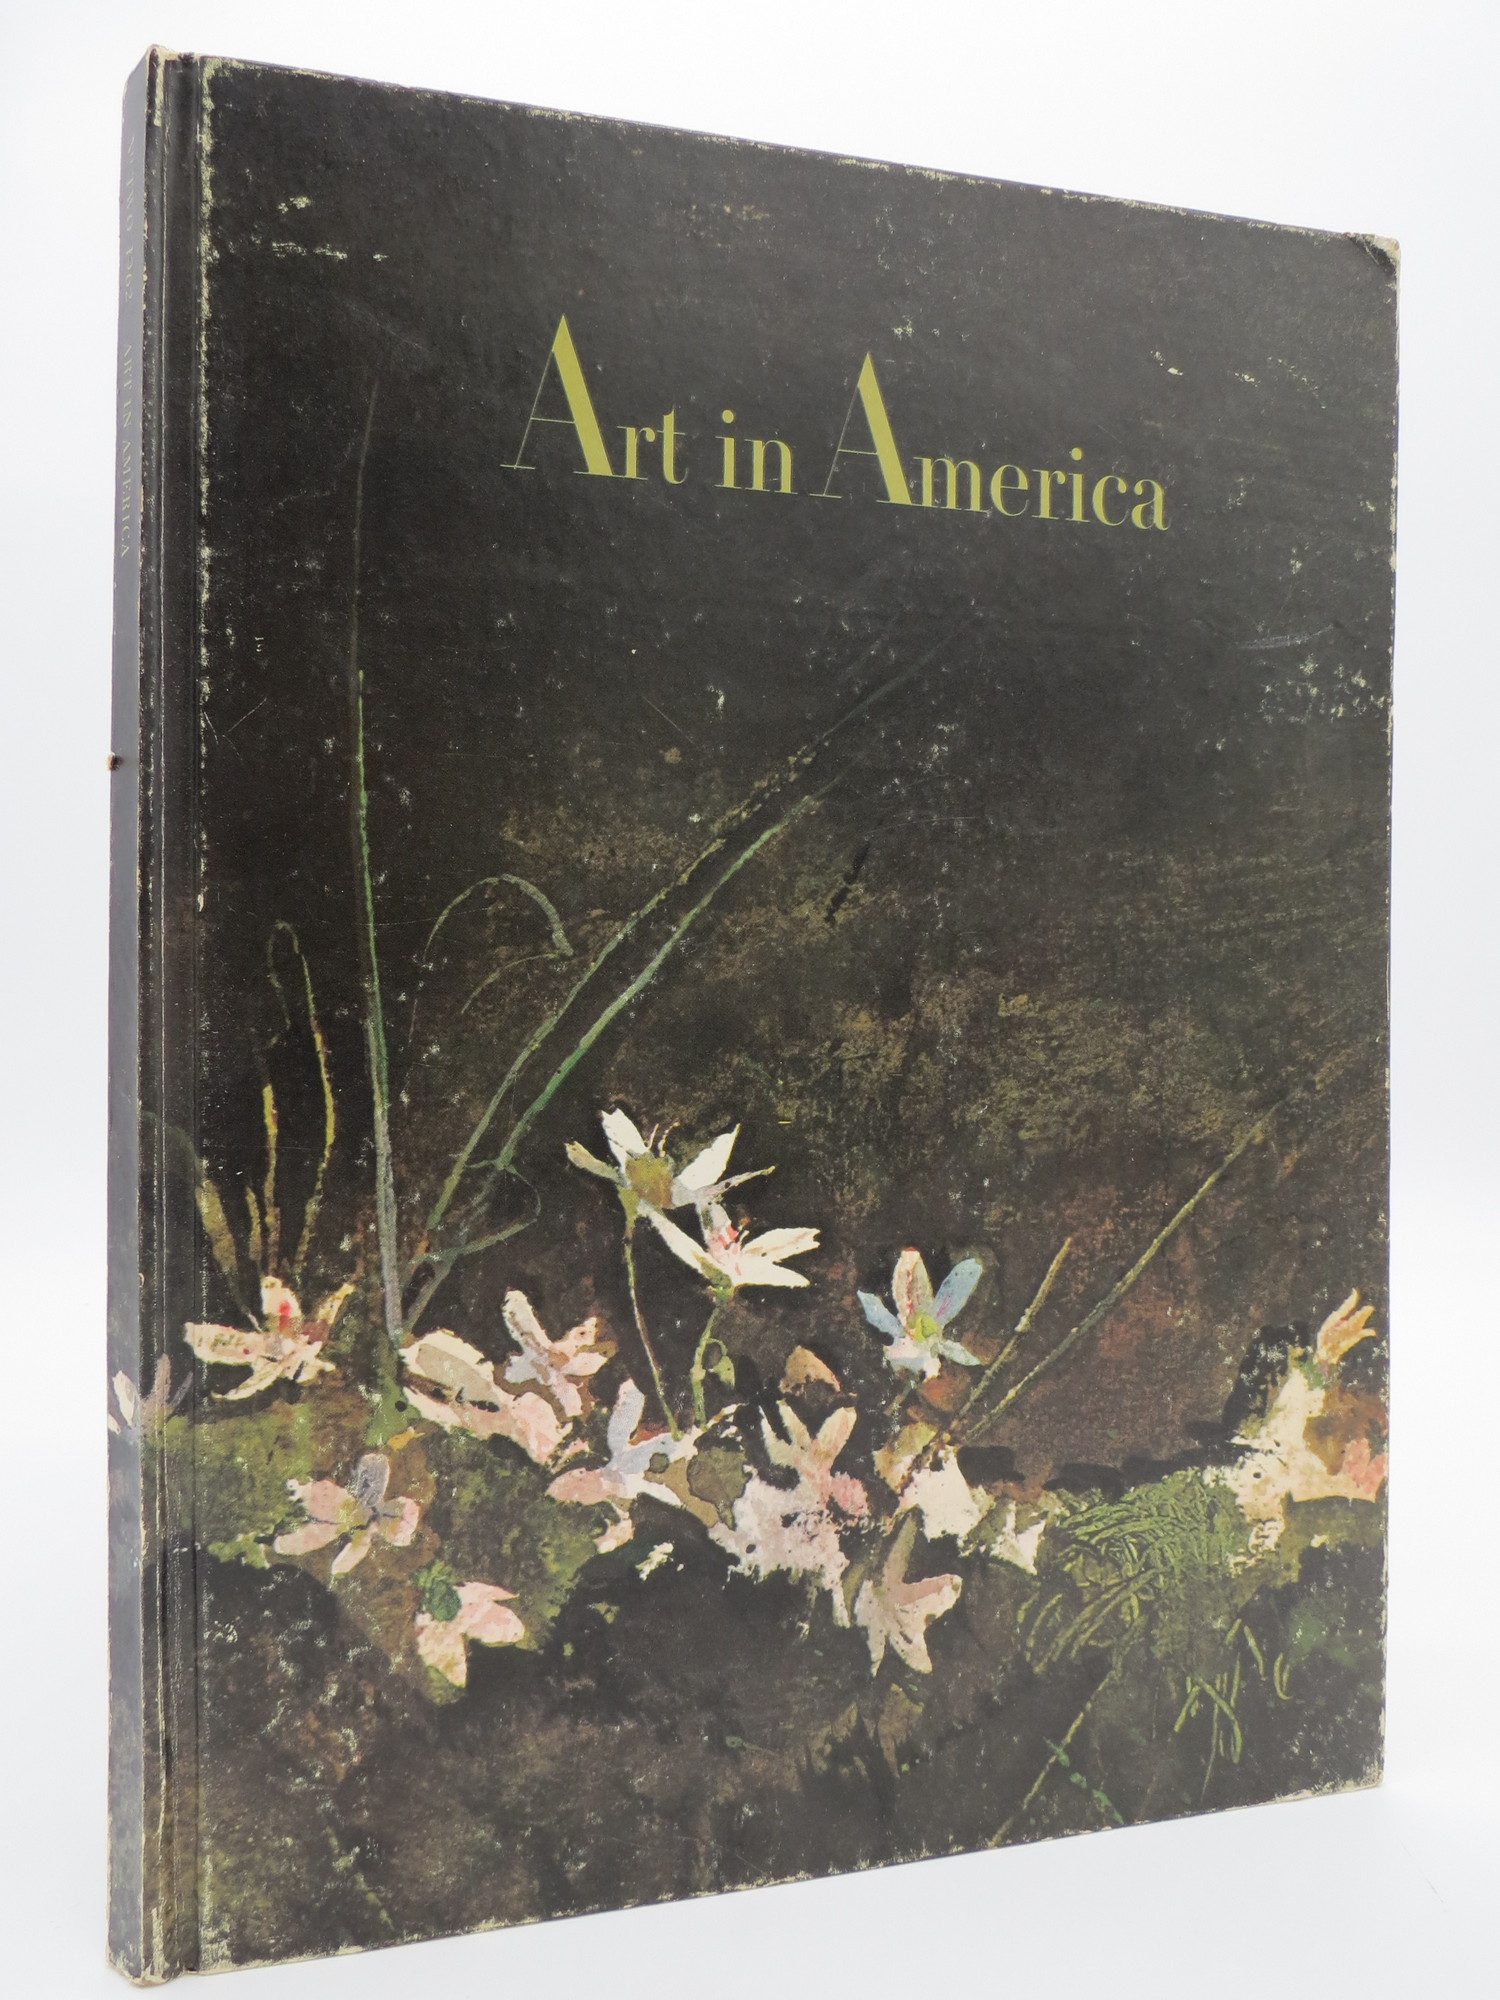 Image for ART IN AMERICA JOURNAL SUMMER 1962 (THE FOUR SEASONS DRY-BRUSH DRAWINGS BY ANDREW WYETH)